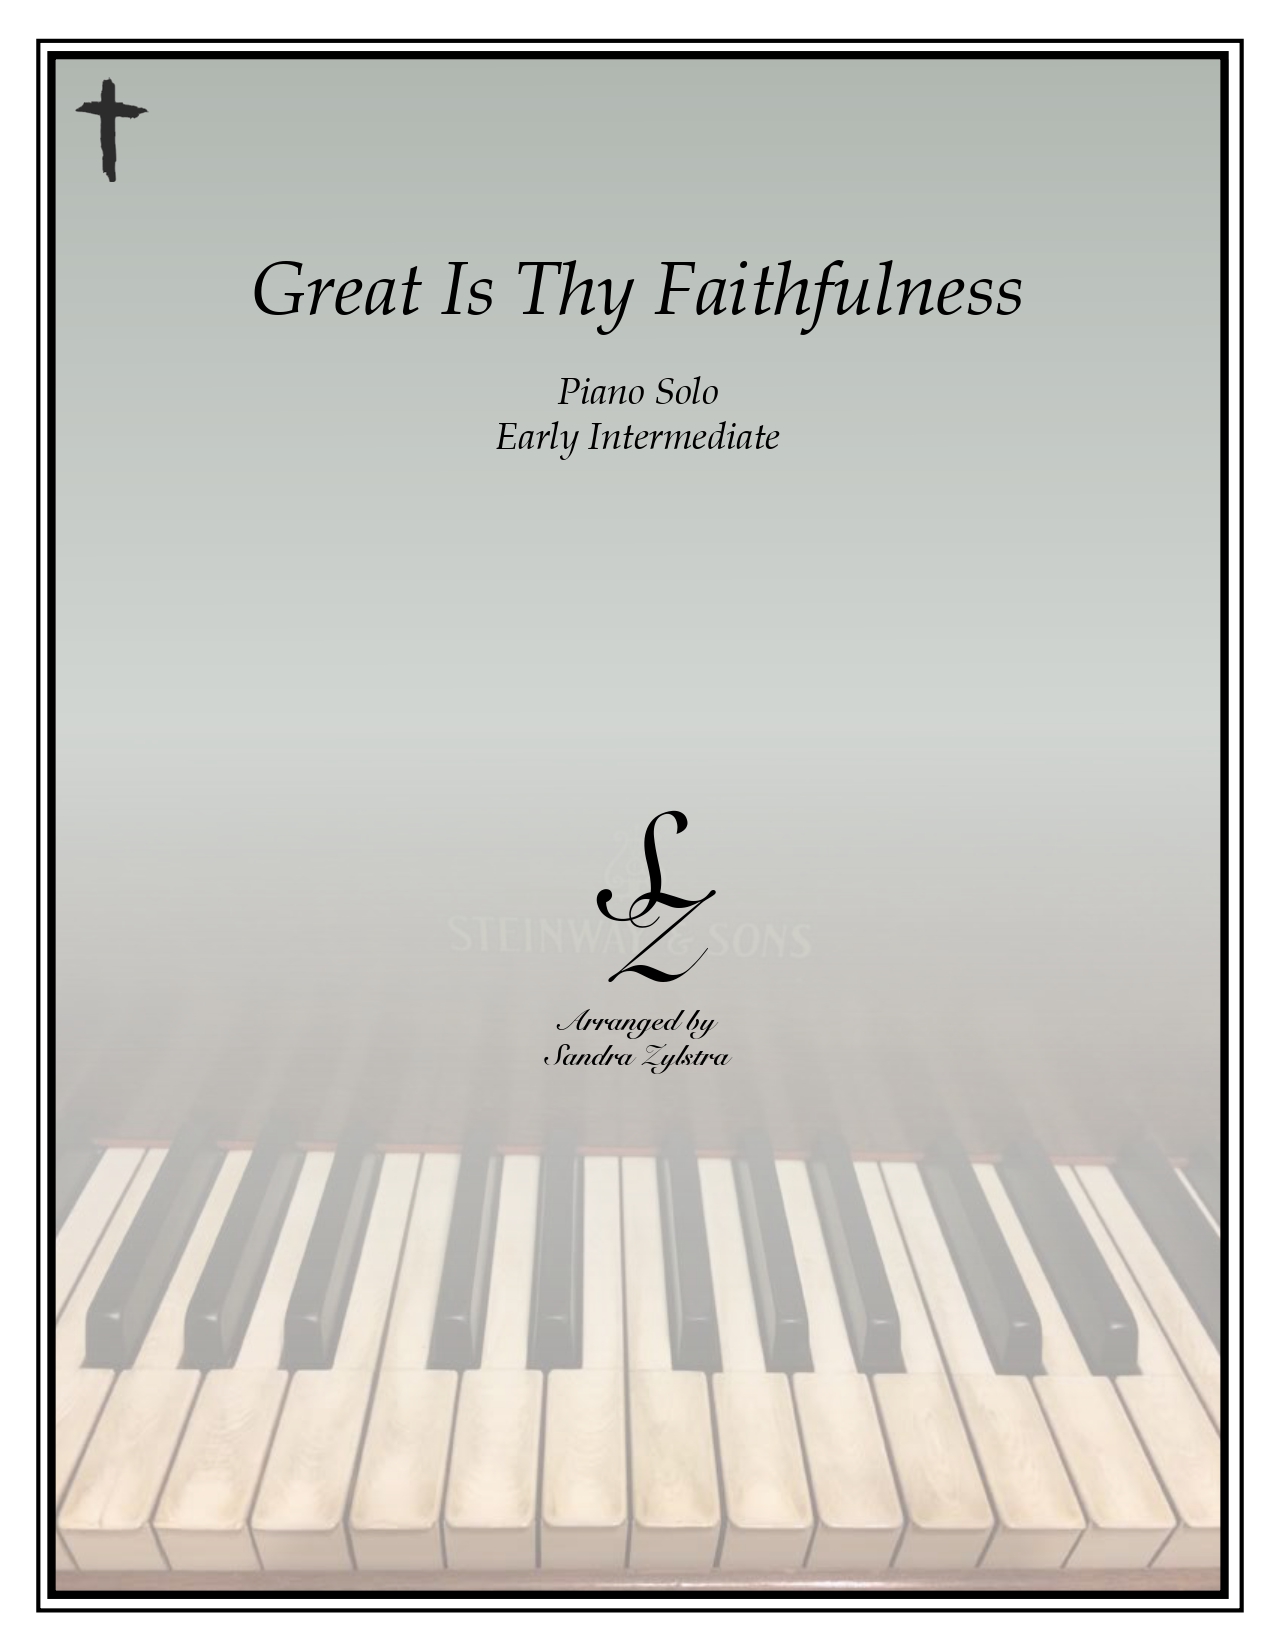 Great Is Thy Faithfulness early intermediate piano cover page 00011